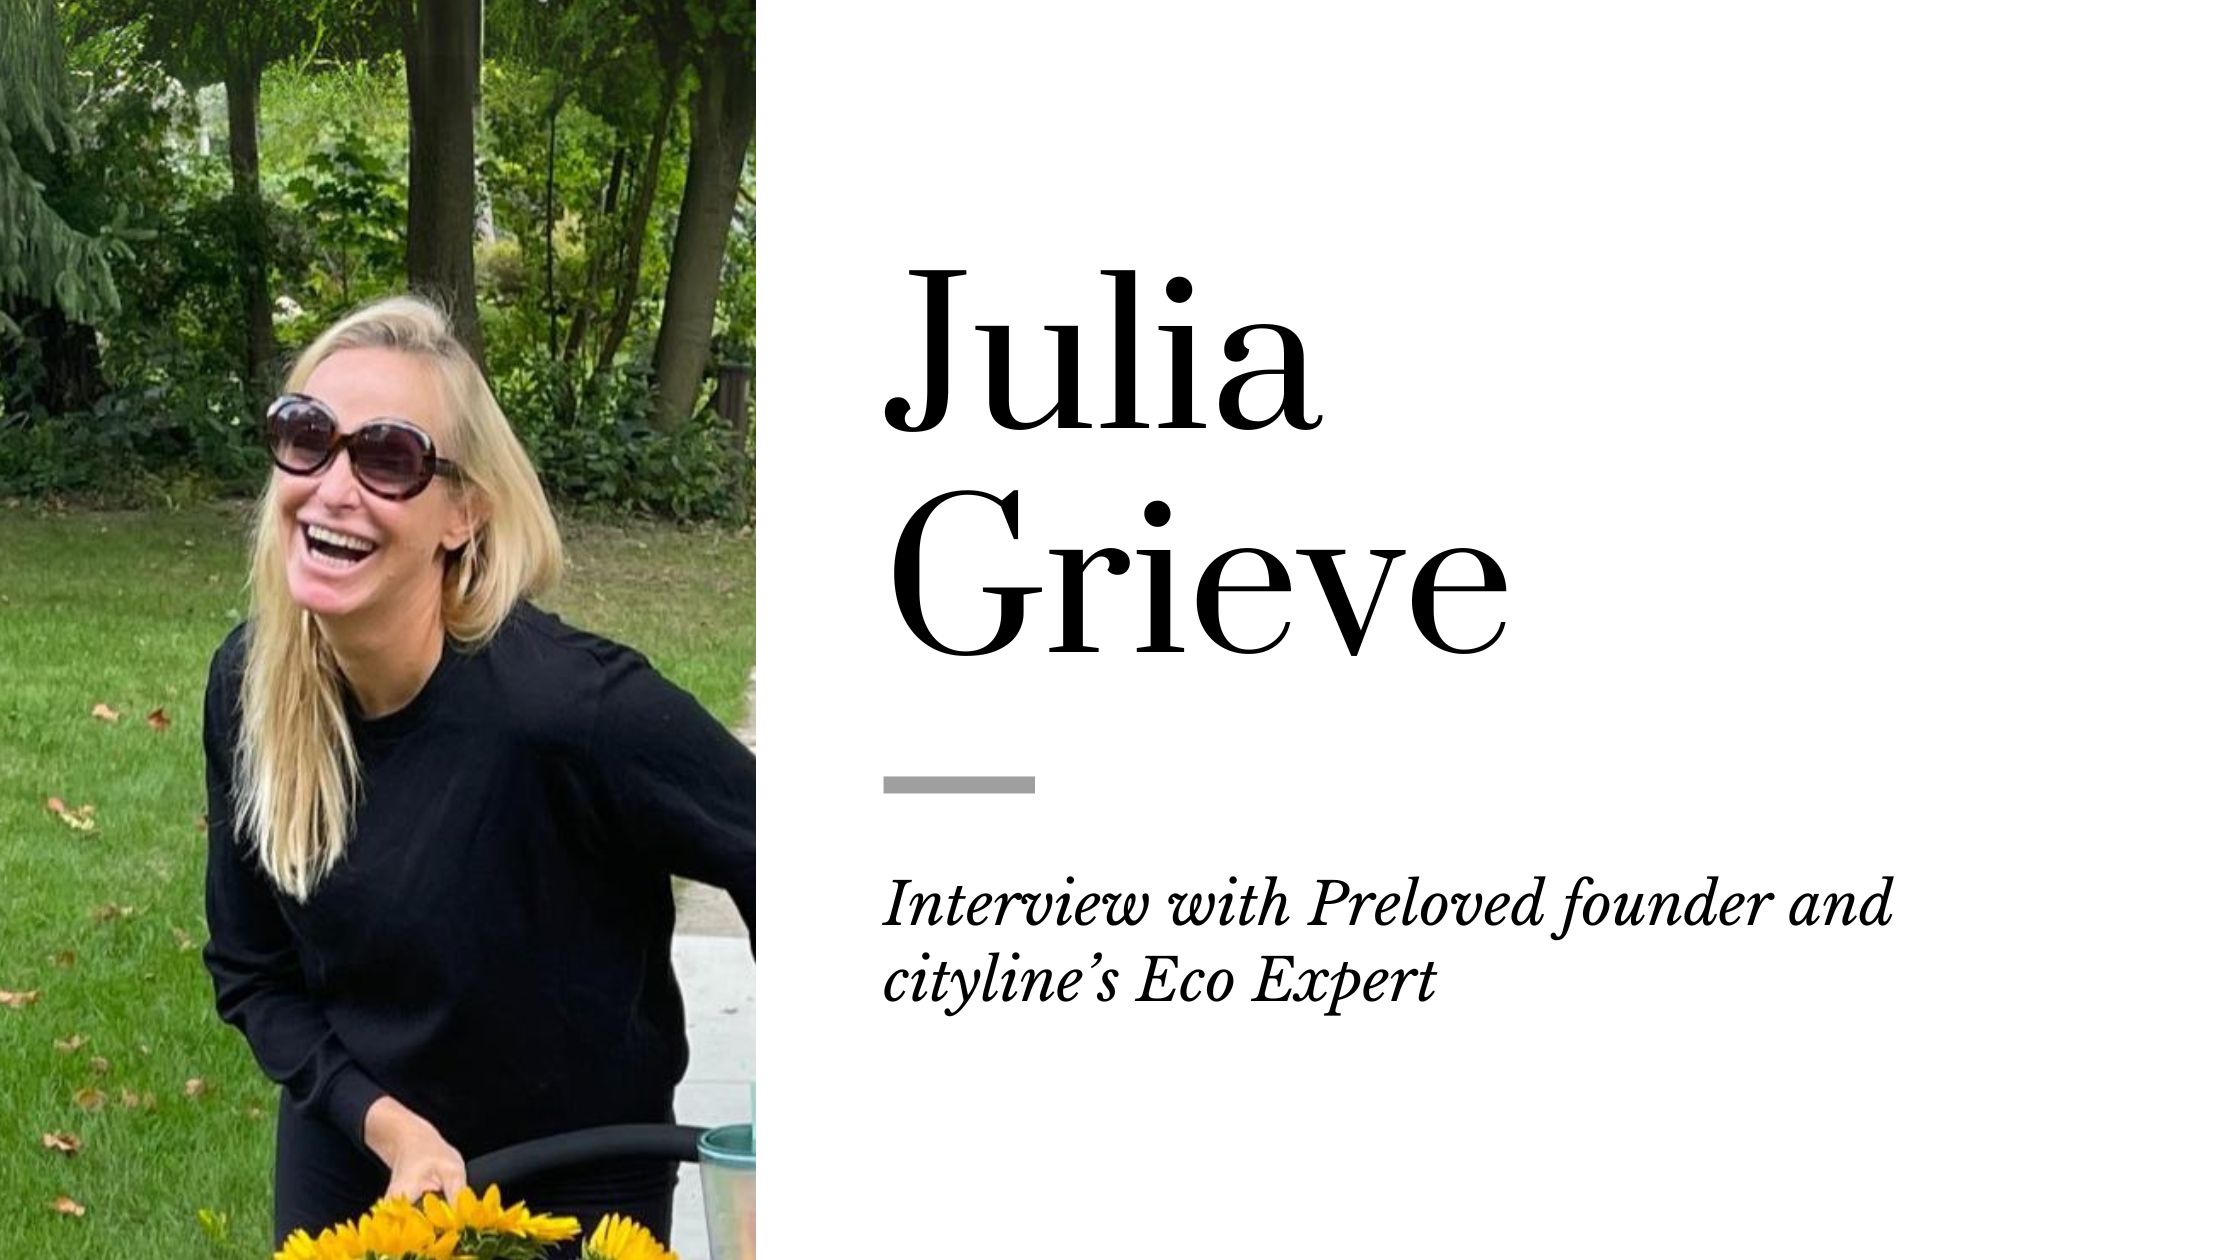 Julia Grieve: Fashioning Sustainability, One Stitch at a Time